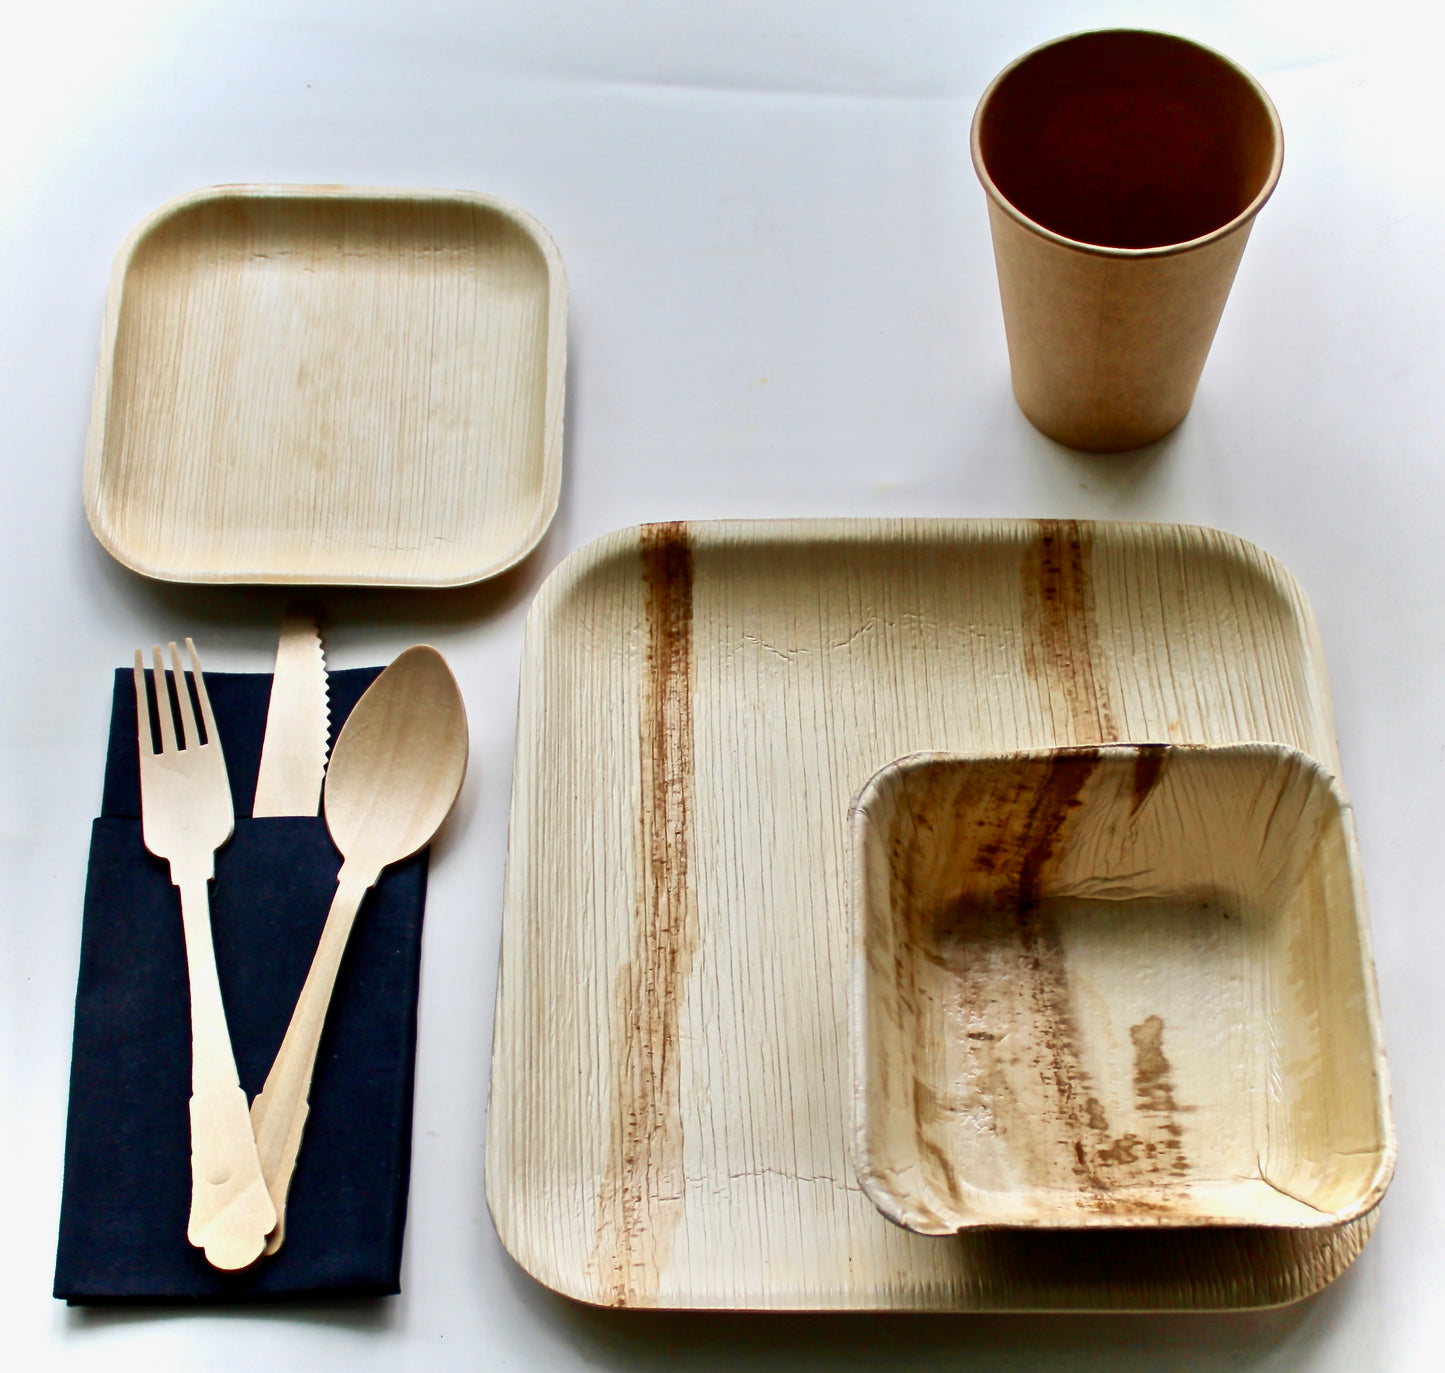 bamboo Type palm leaf plates 10  pic 9.5" Square - 10 pic 5" Bowl - 10 pic 6" Square -  10 pic coup - 30  pic cutler